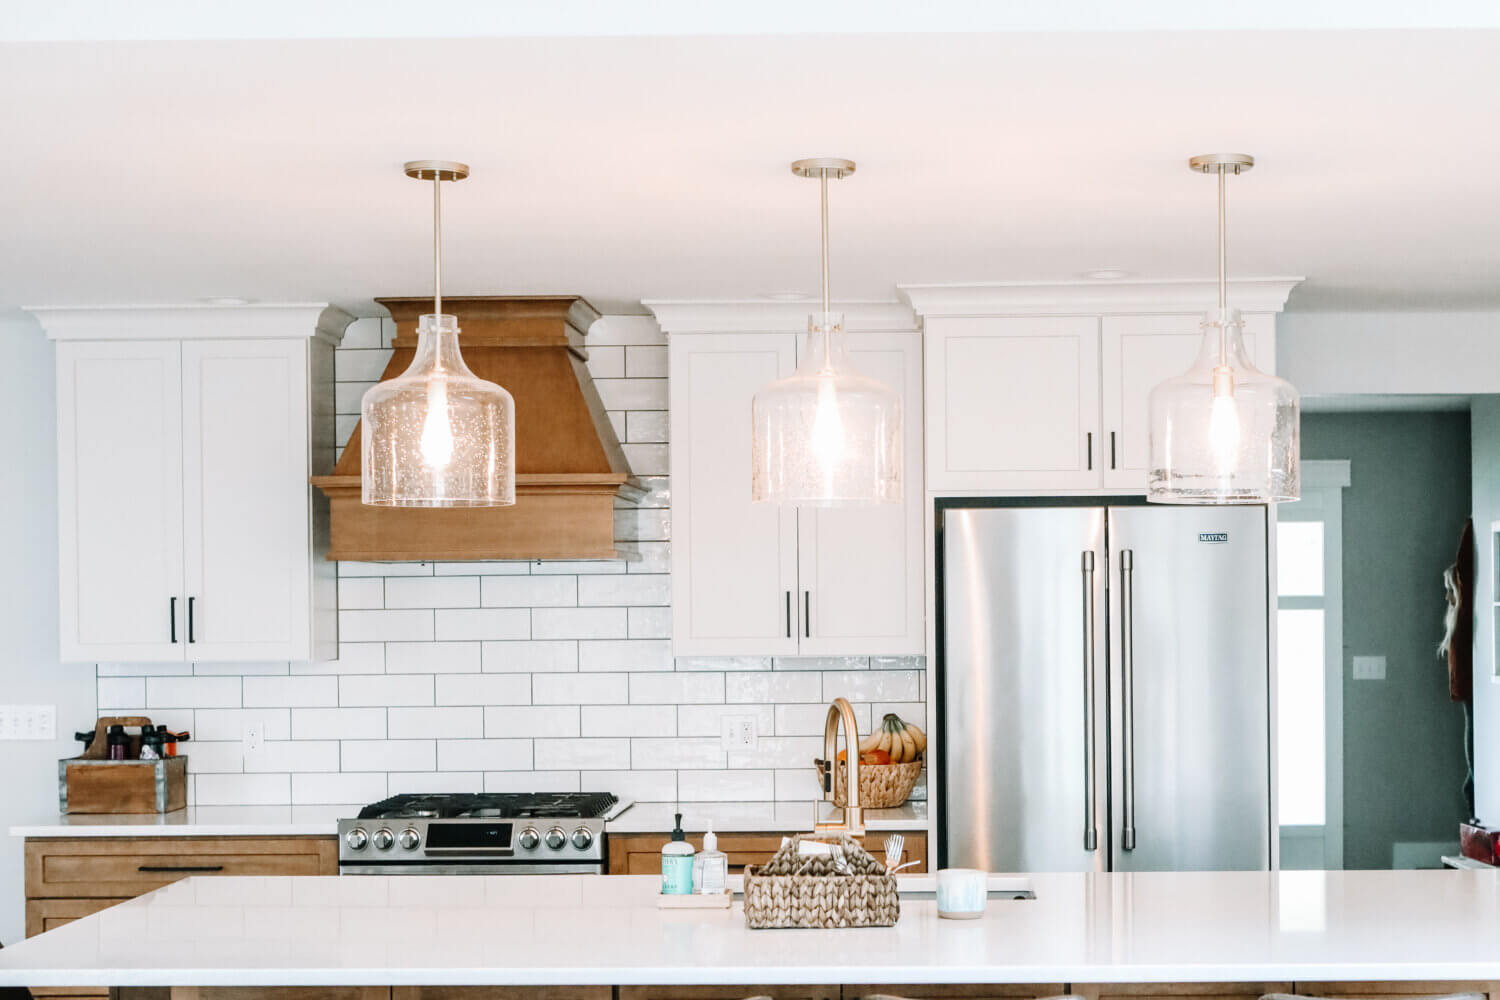 A straight on view of the cooking area of a newly remodeled kitchen with white painted wall cabinets and light stained base cabinets and wood hood.